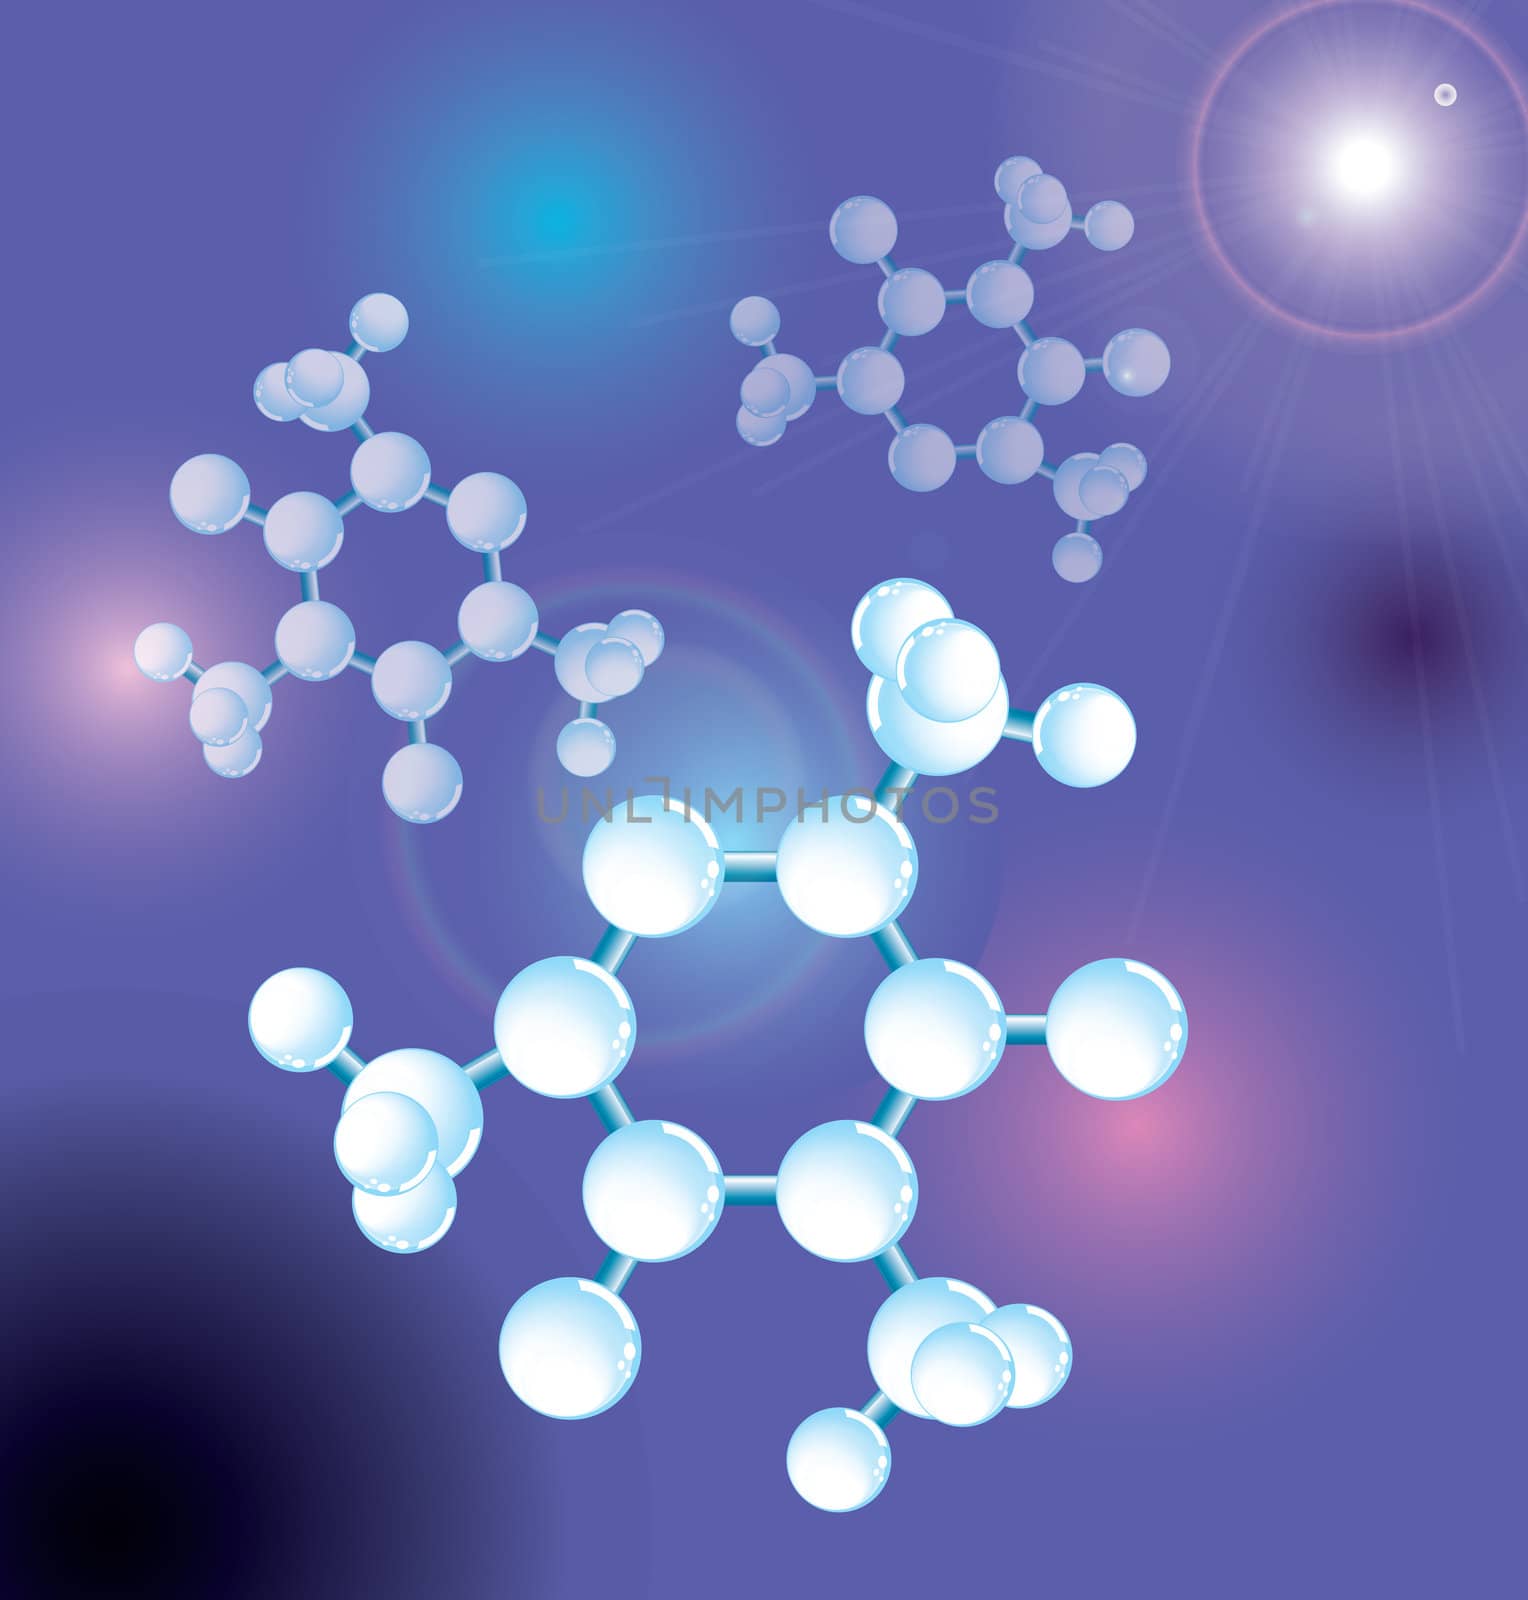 Molecule,  molecular structure with flate, science abstract background, eps10